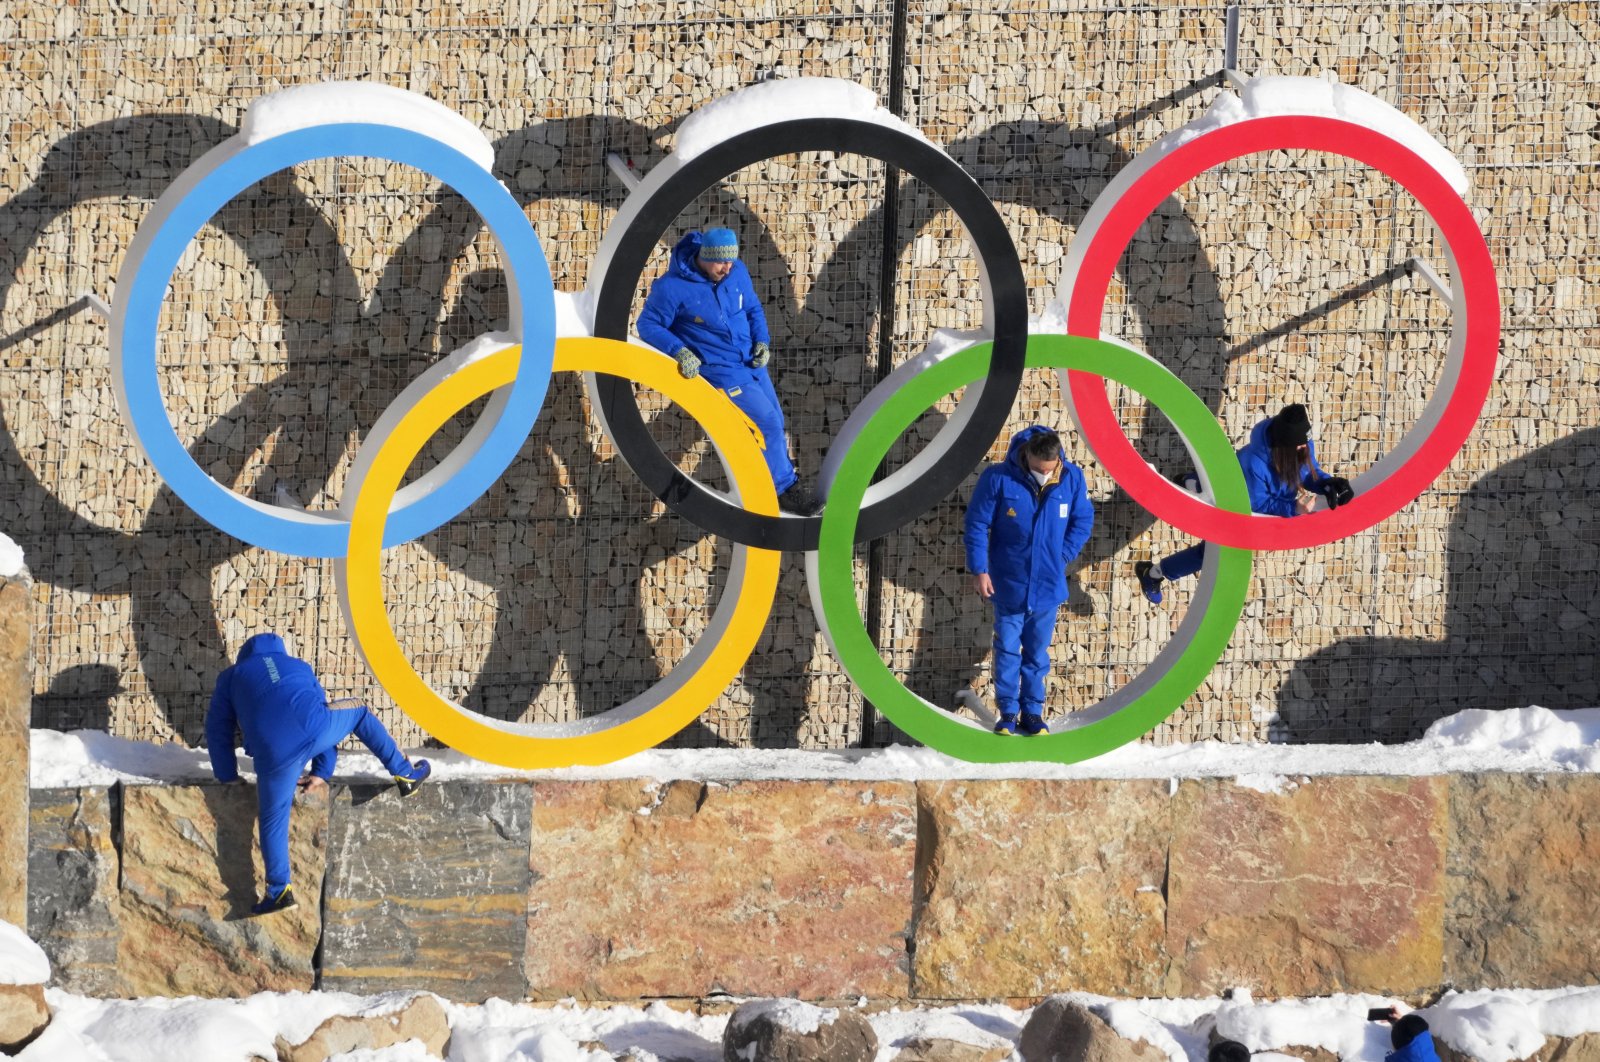 Ukraine team members climb on the Olympic Rings to pose for a photo at the 2022 Winter Games Village, Beijing, China, Feb. 14, 2022. (AP Photo)